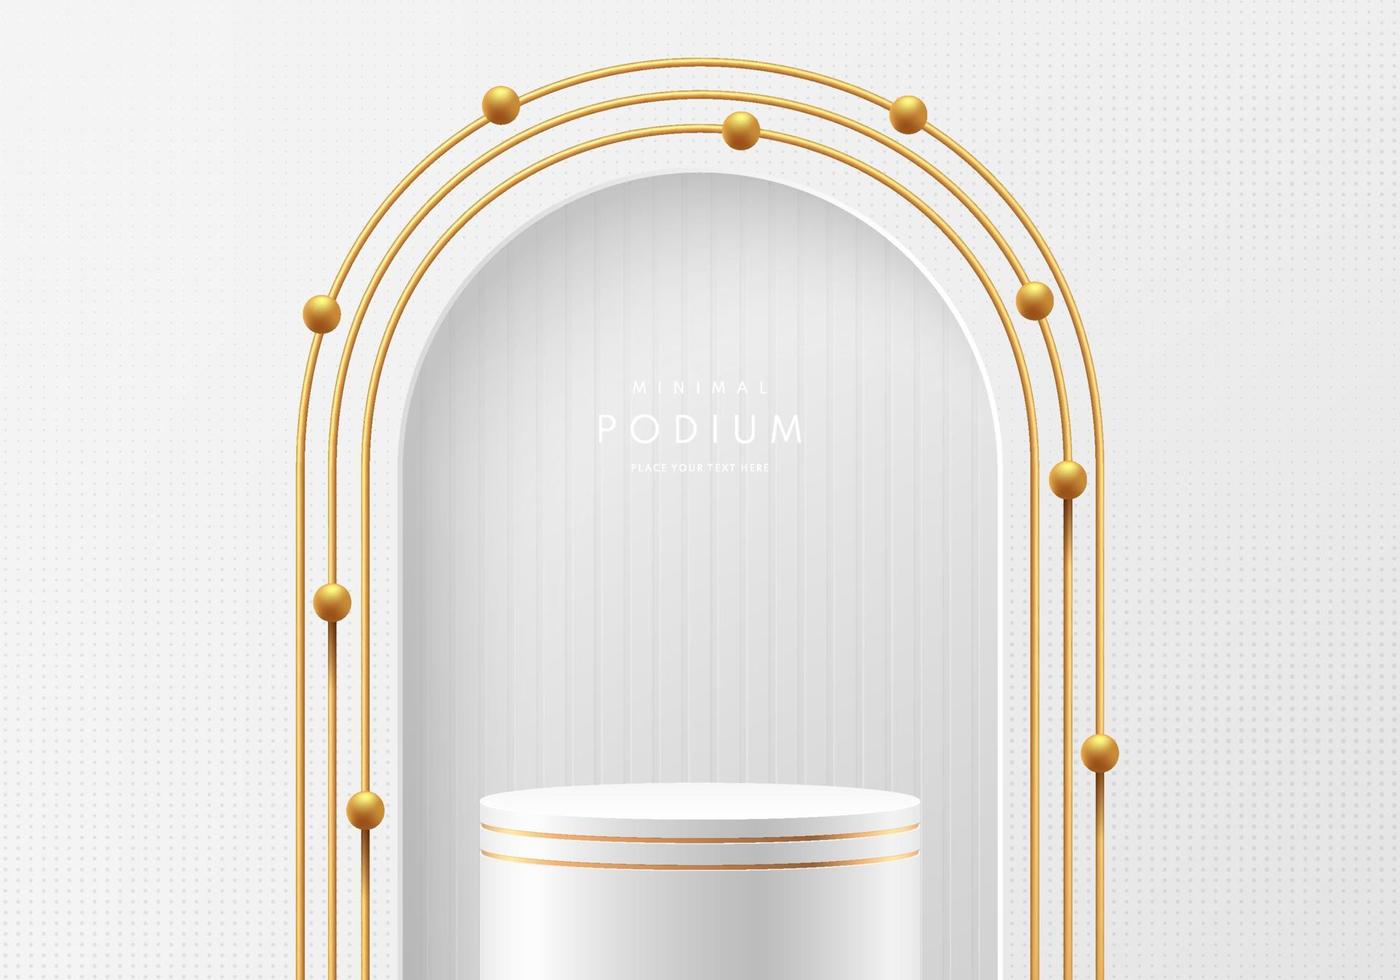 Realistic white, golden 3D cylinder stand podium in clean room with golden tube arch shape and beads. Luxury minimal scene for mockup product, Stage showcase, promotion display. Vector geometric forms